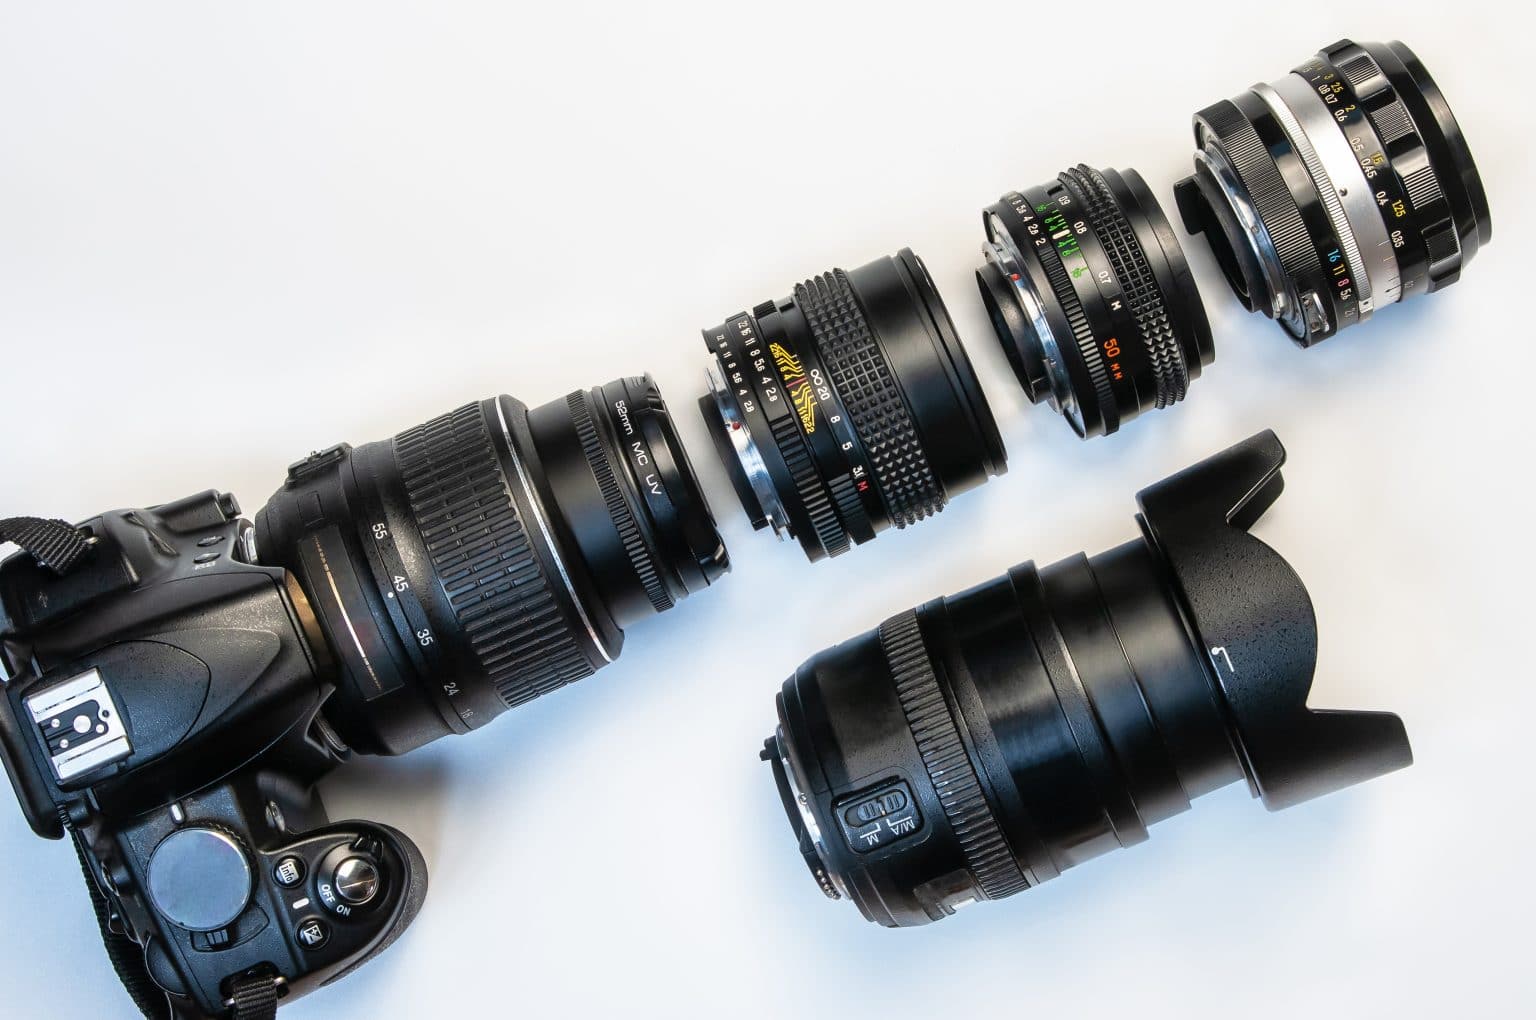 camera and photo lenses on white background. Concept of interchangeable lenses and optics. Flat lay, top view.